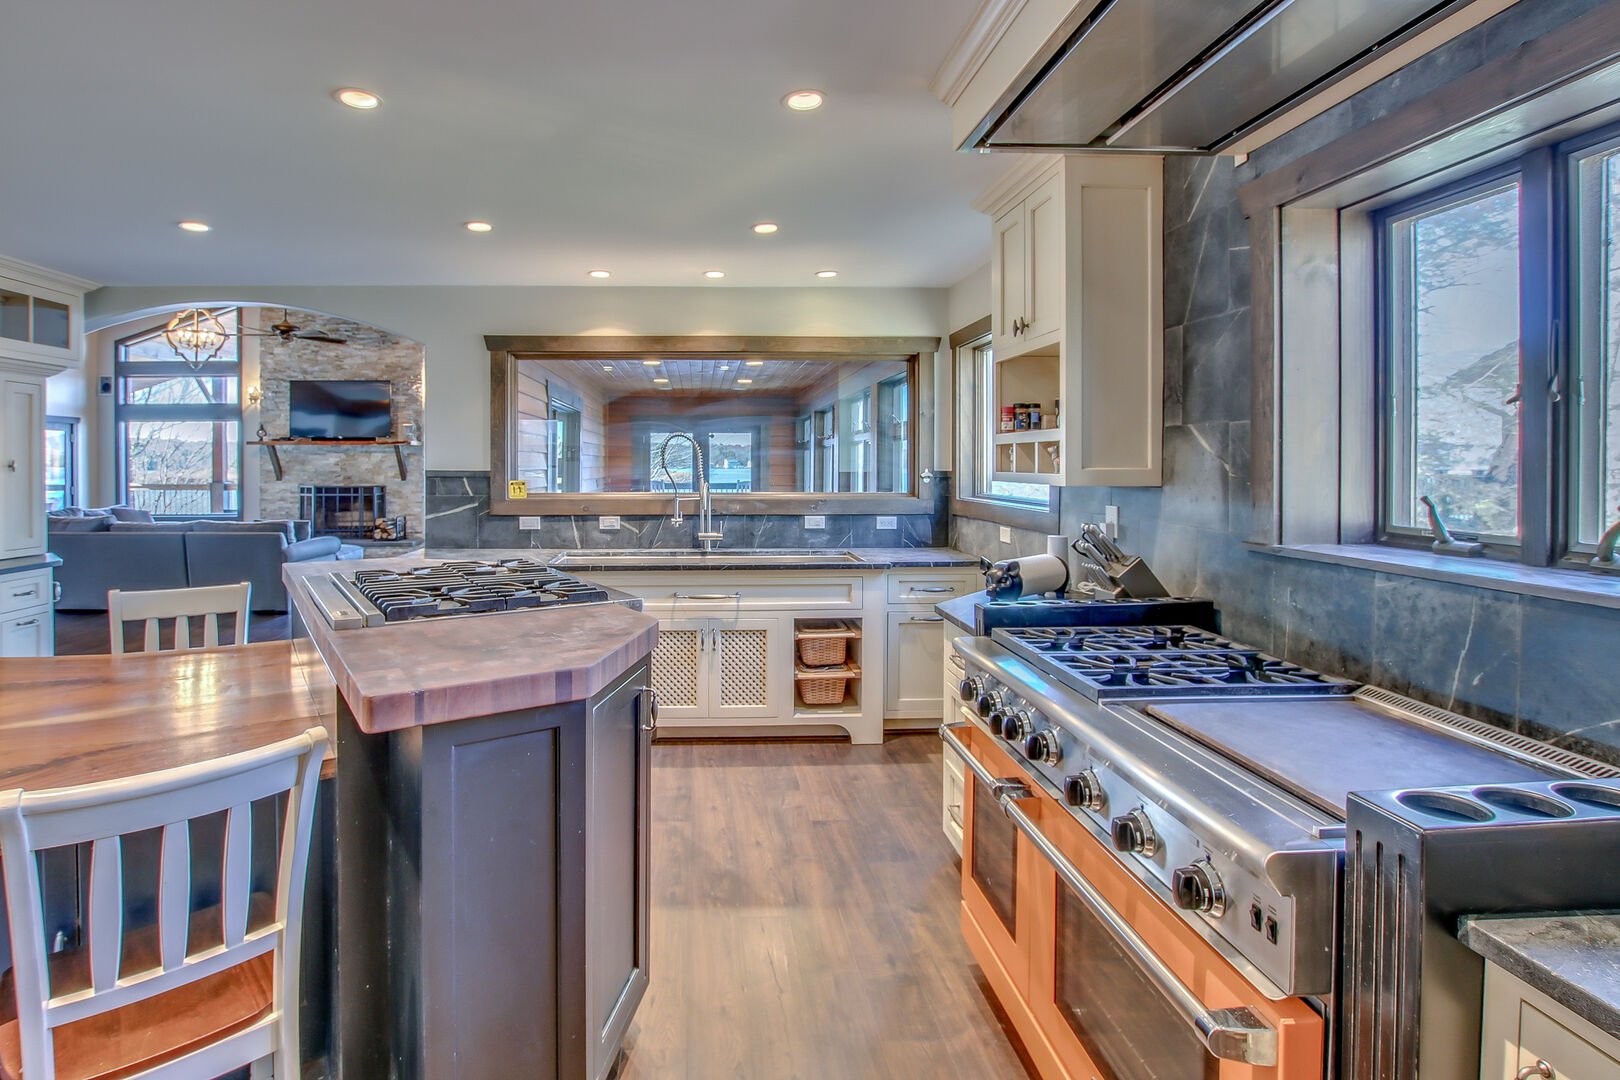 The large oven, island stove top, and sink of the kitchen in this Poconos rental by the lake.